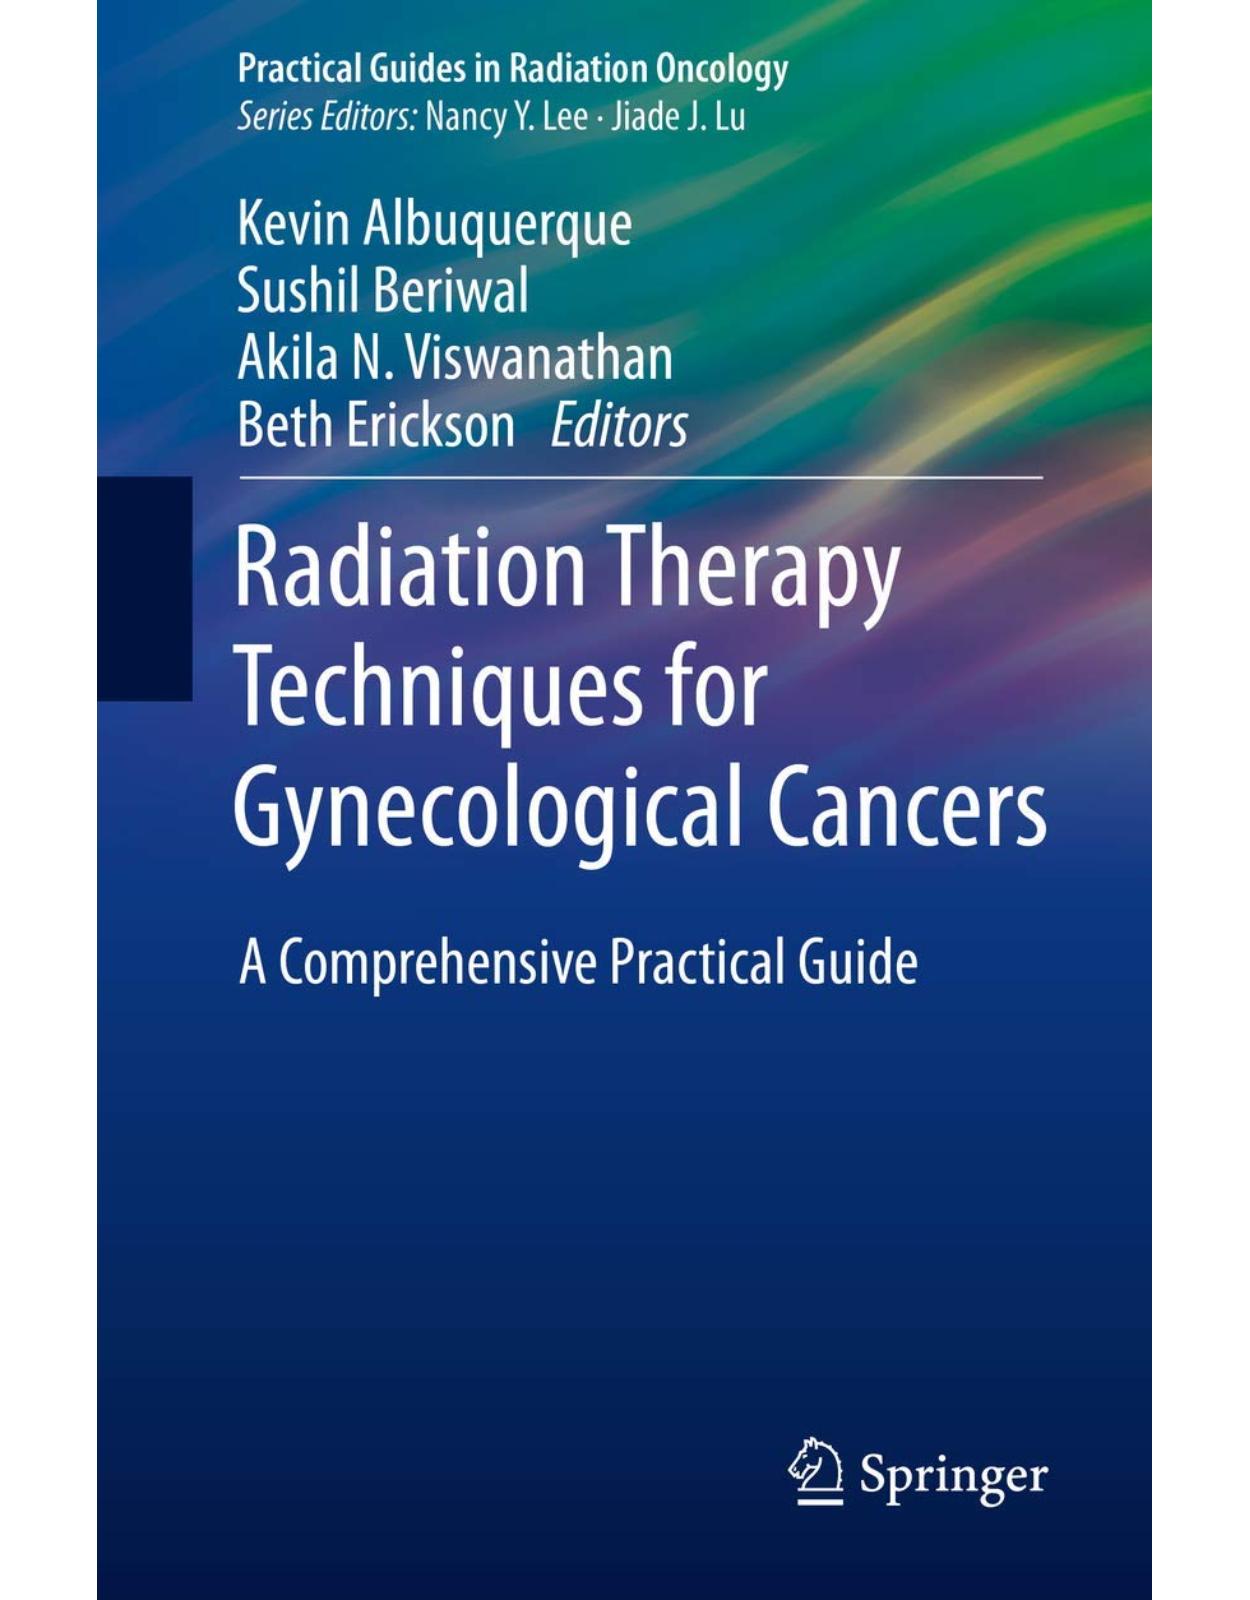 Radiation Therapy Techniques for Gynecological Cancers: A Comprehensive Practical Guide